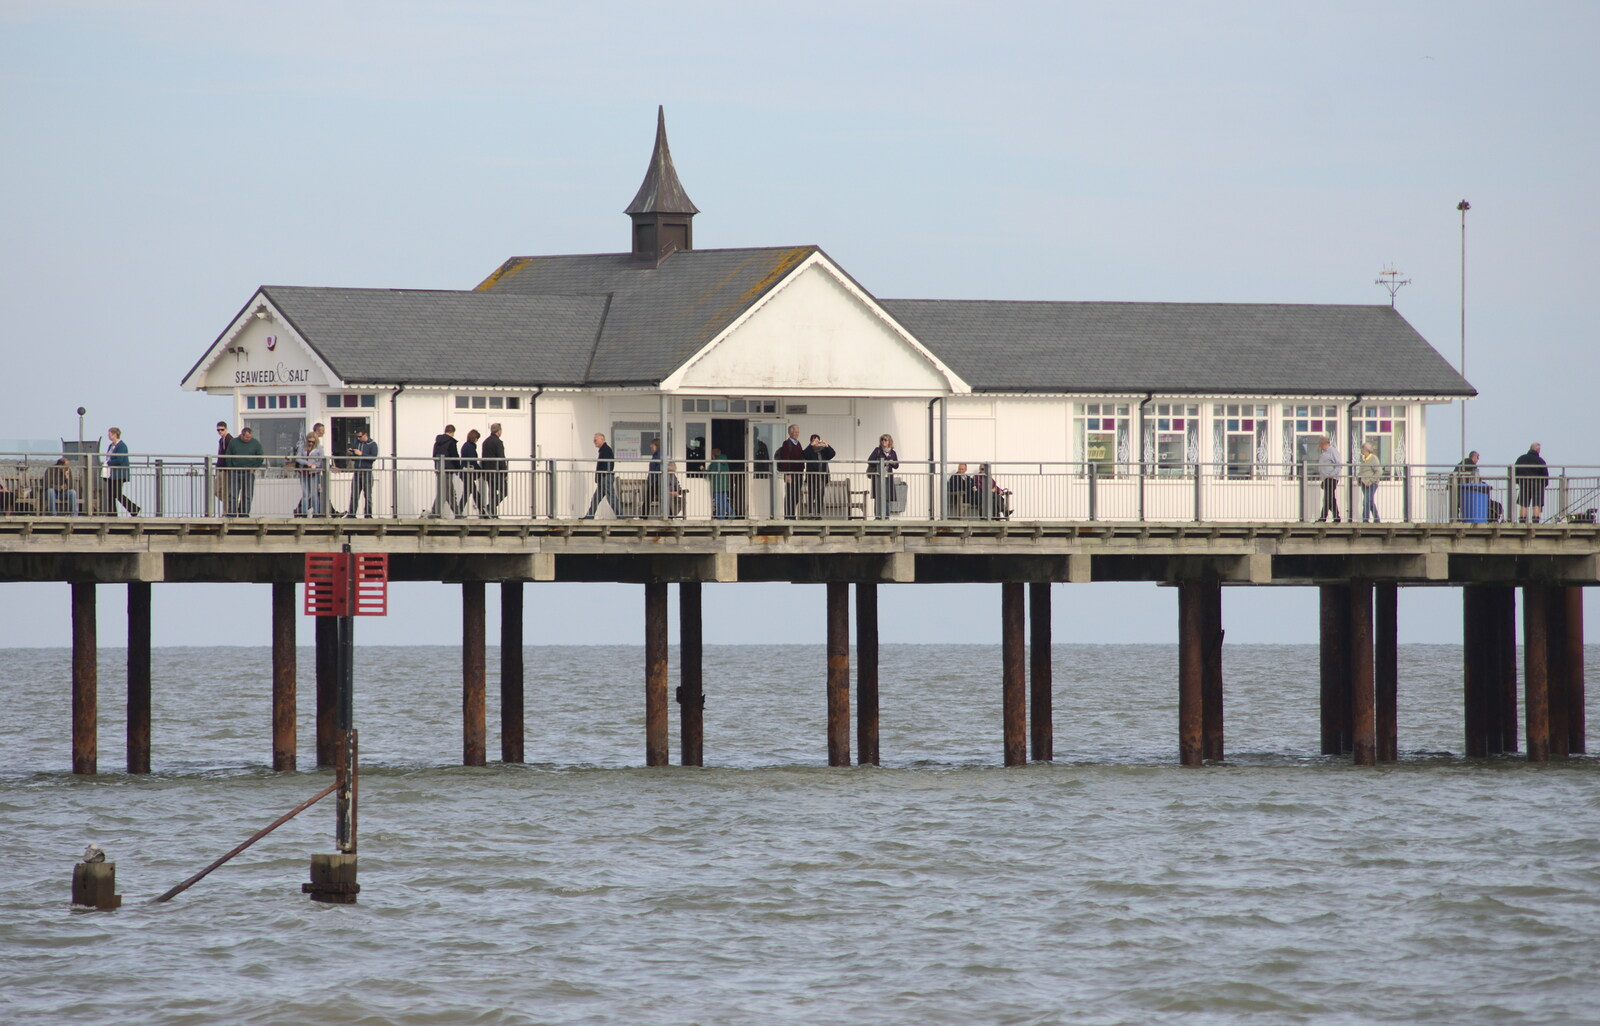 The end of the pier from On The Beach Again, Southwold, Suffolk - 12th October 2014